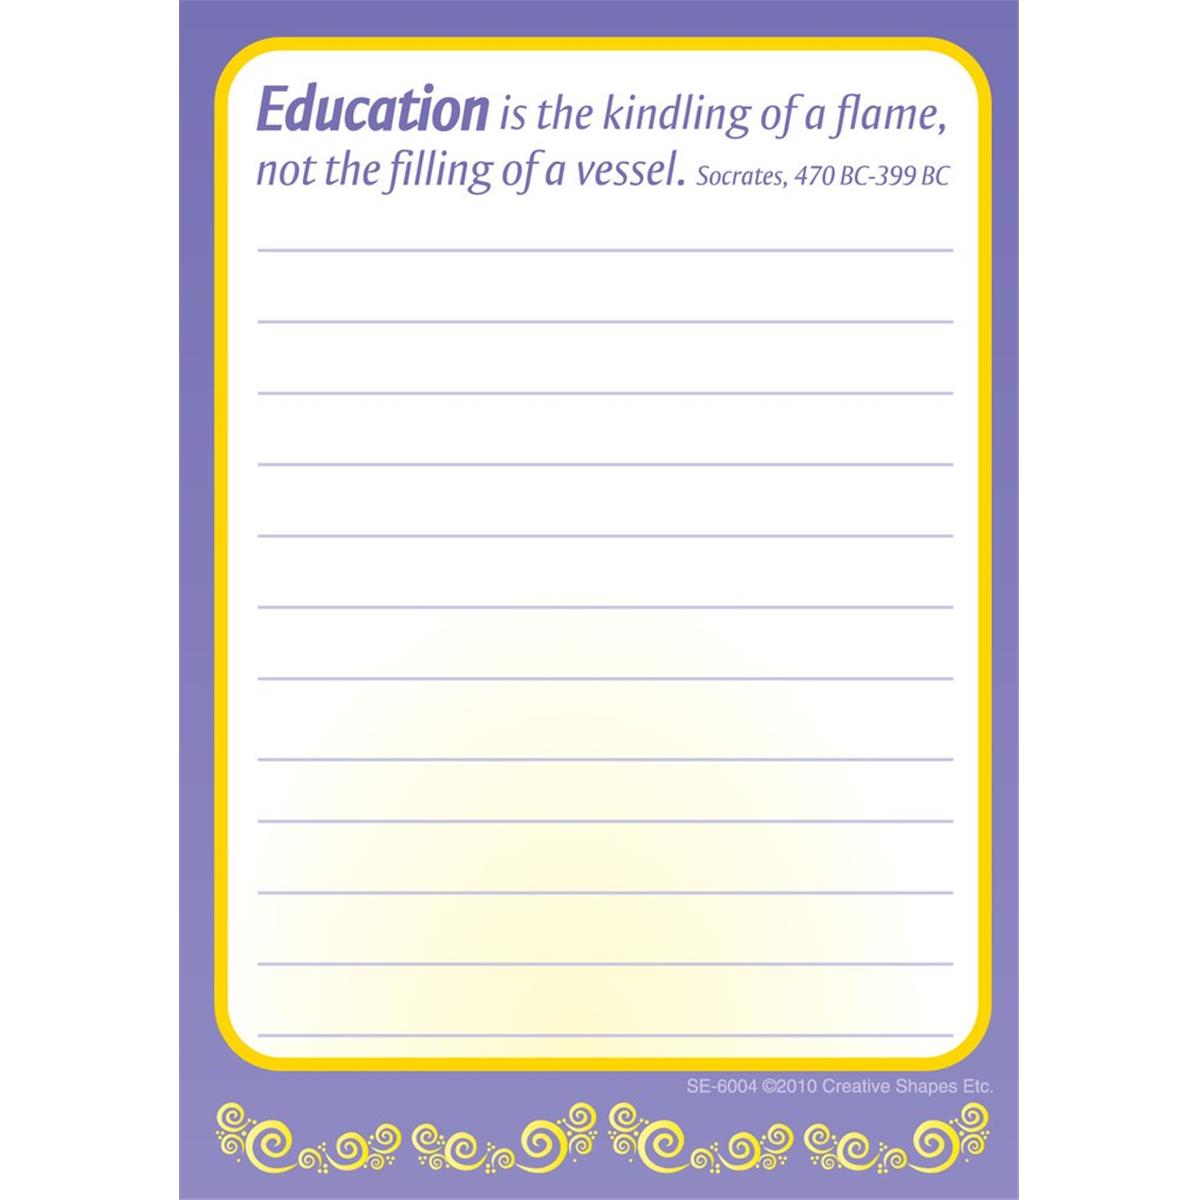 Se-6004 3.5 X 5 In. Notes & Quotes, Education - 35 Sheets Per Pack